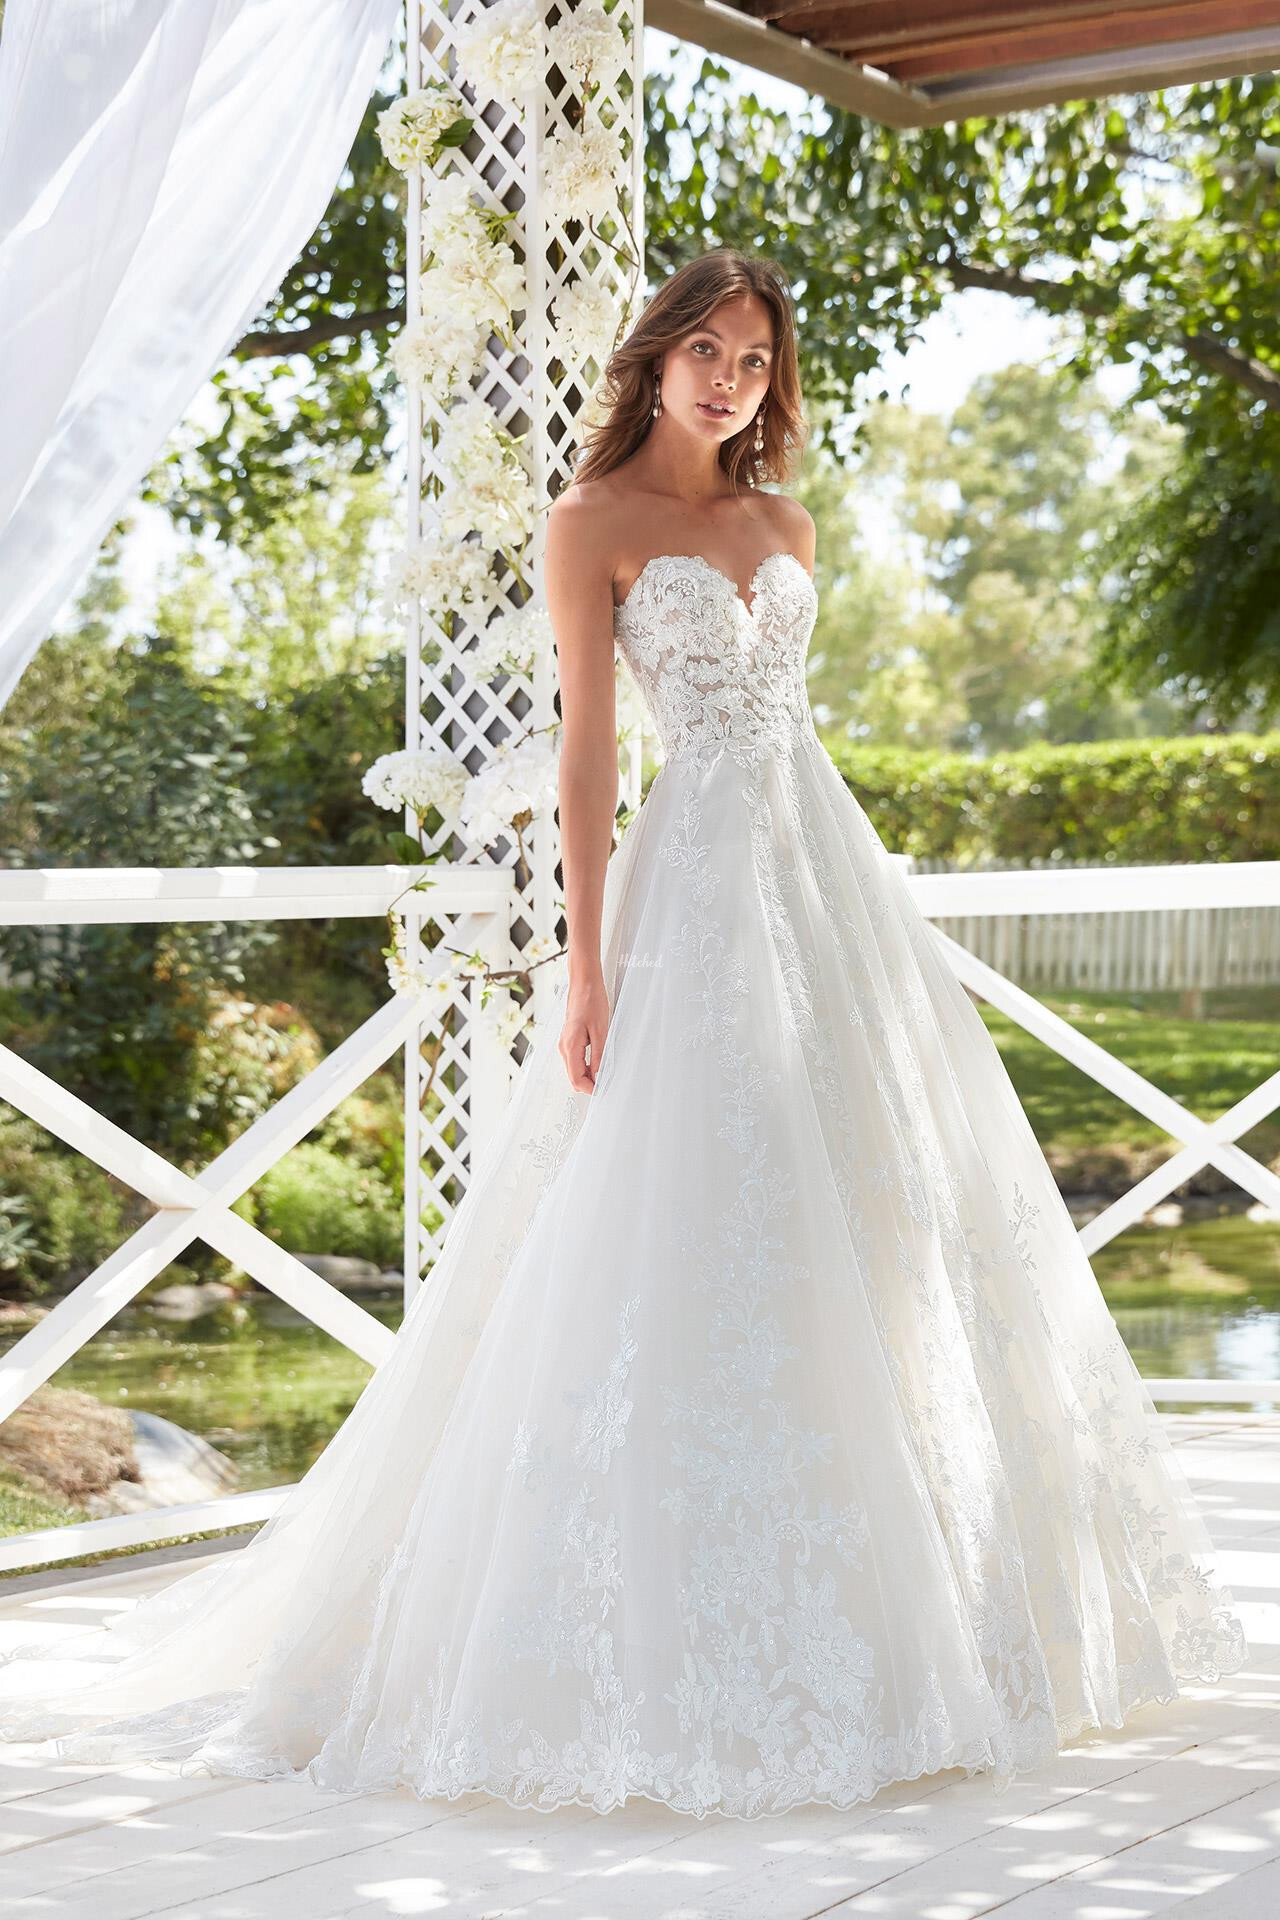 Celsa Wedding Dress from Aire Barcelona - hitched.co.uk